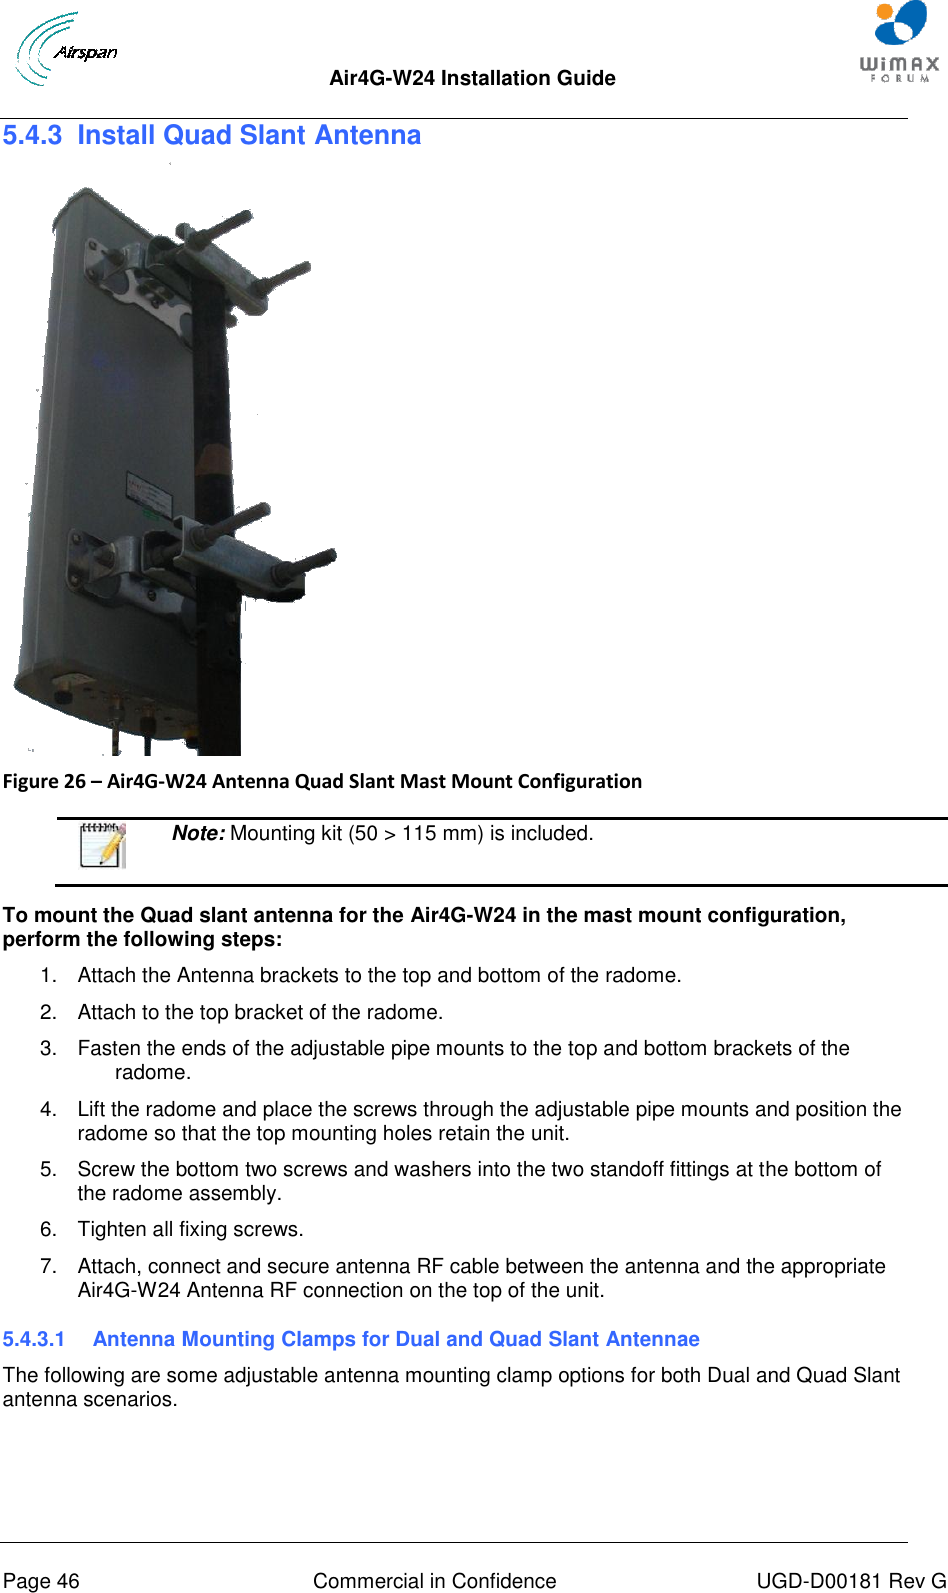  Air4G-W24 Installation Guide     Page 46  Commercial in Confidence  UGD-D00181 Rev G 5.4.3  Install Quad Slant Antenna    Figure 26 – Air4G-W24 Antenna Quad Slant Mast Mount Configuration    Note: Mounting kit (50 &gt; 115 mm) is included.  To mount the Quad slant antenna for the Air4G-W24 in the mast mount configuration, perform the following steps: 1.  Attach the Antenna brackets to the top and bottom of the radome.  2.  Attach to the top bracket of the radome. 3.  Fasten the ends of the adjustable pipe mounts to the top and bottom brackets of the radome. 4.  Lift the radome and place the screws through the adjustable pipe mounts and position the radome so that the top mounting holes retain the unit. 5.  Screw the bottom two screws and washers into the two standoff fittings at the bottom of the radome assembly. 6.  Tighten all fixing screws. 7.  Attach, connect and secure antenna RF cable between the antenna and the appropriate Air4G-W24 Antenna RF connection on the top of the unit. 5.4.3.1  Antenna Mounting Clamps for Dual and Quad Slant Antennae The following are some adjustable antenna mounting clamp options for both Dual and Quad Slant antenna scenarios.  